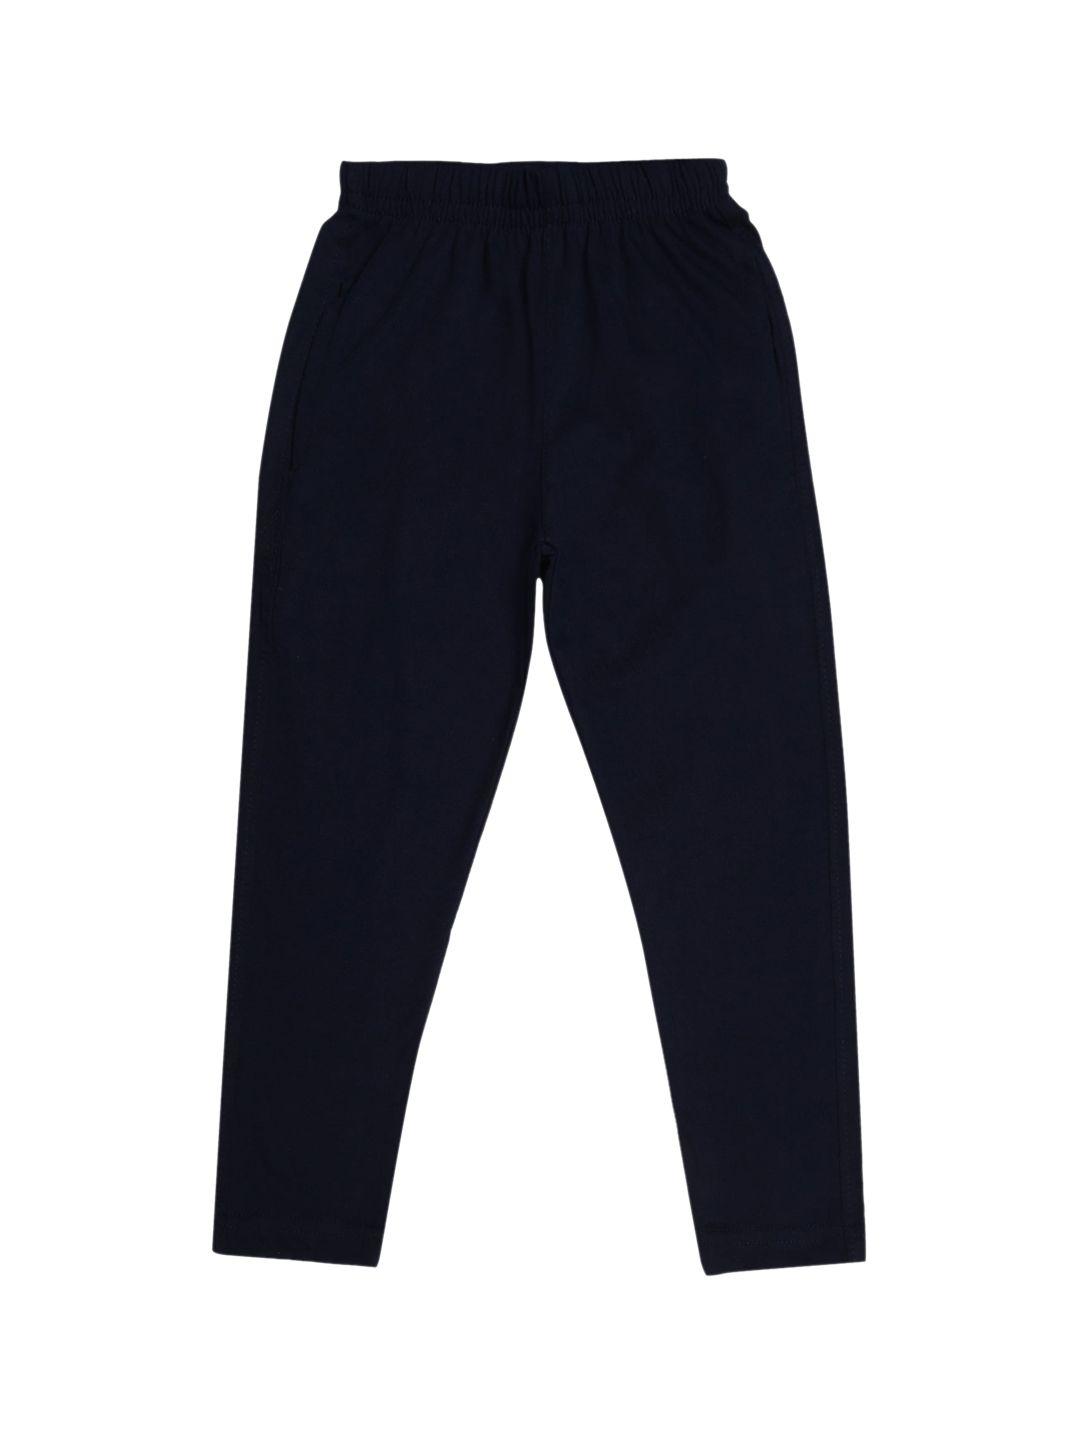 dyca boys navy blue solid cotton track pants